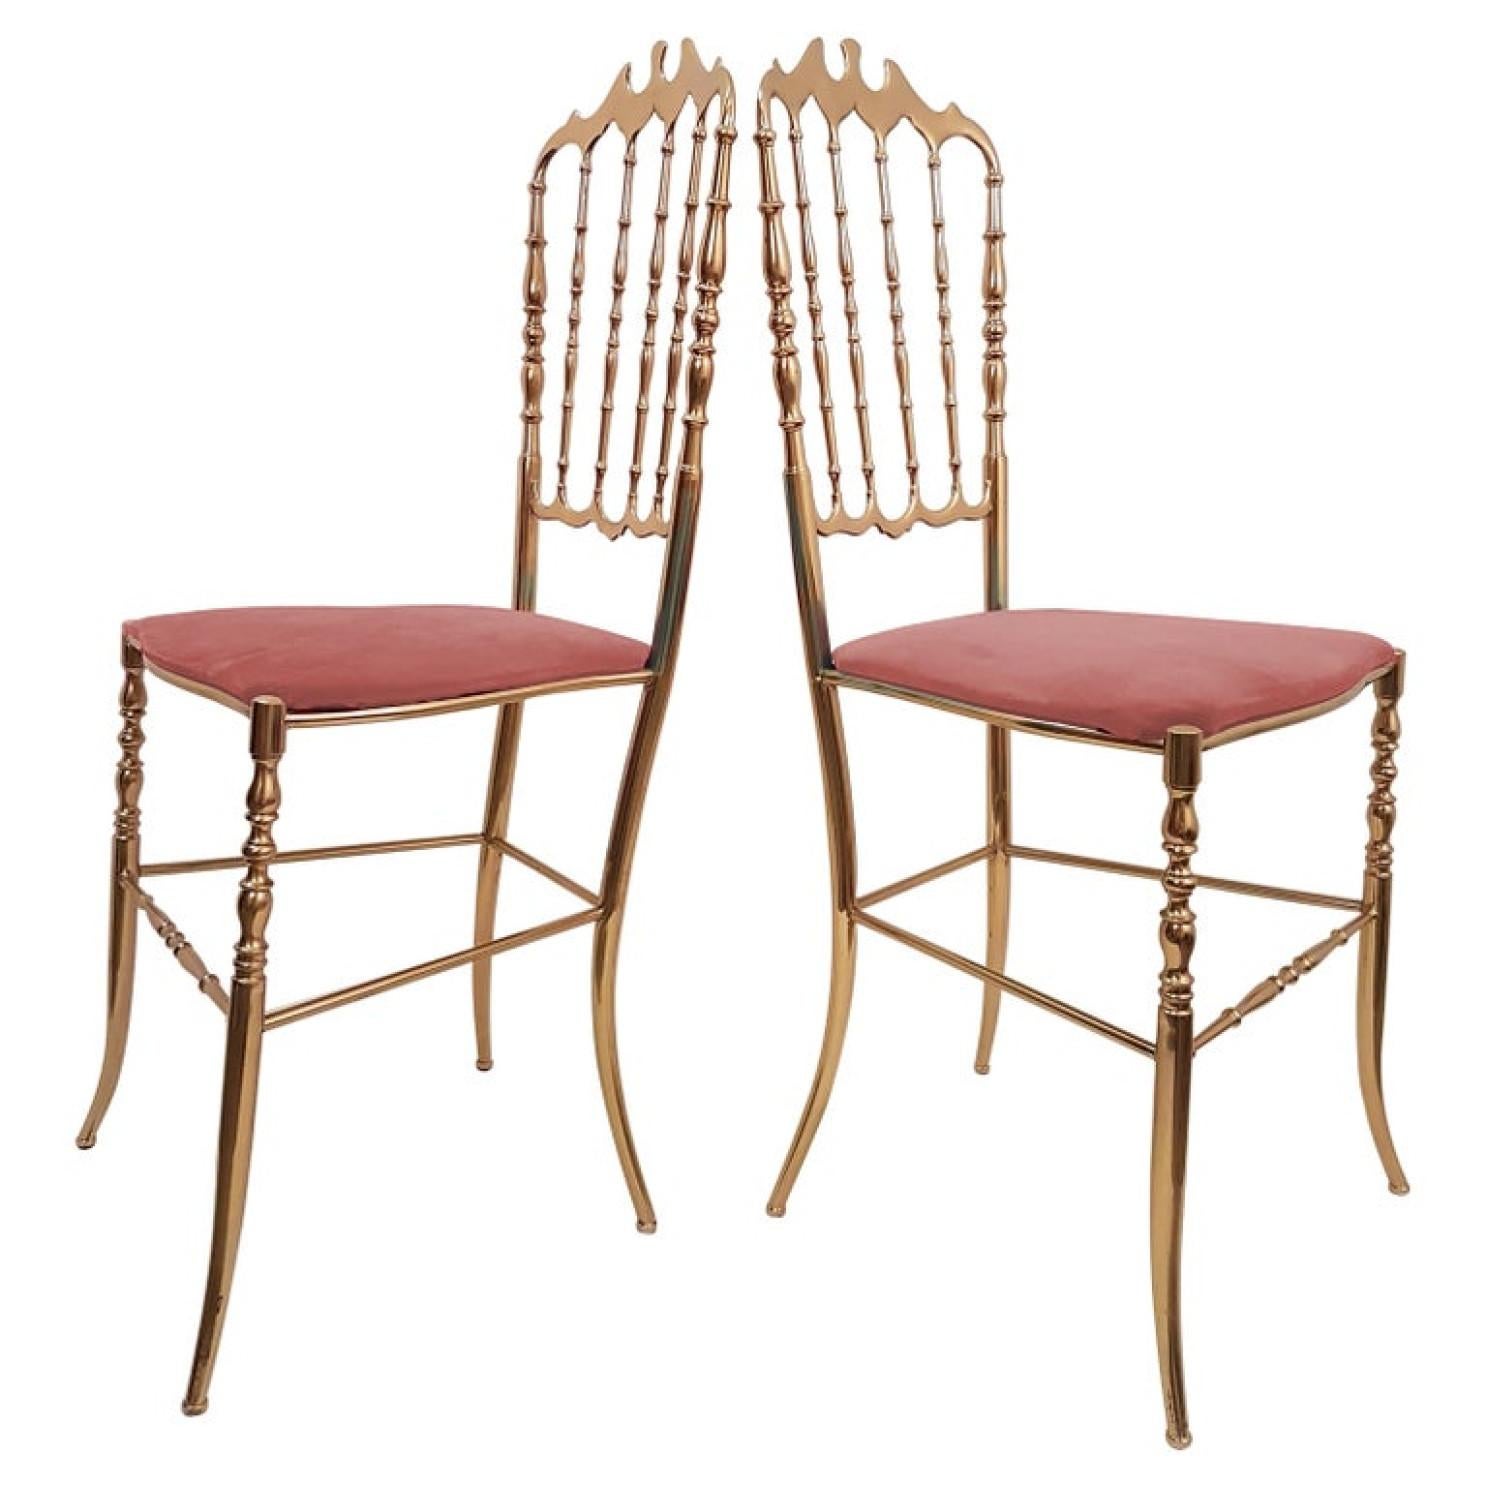 Pair of refined Italian campanino classic Chiavari chairs, circa 1950s. Massive brass with upholstered with pink velvet.

In very good condition. We are able, to reupholster these chairs in any type of fabric. The professional and experienced